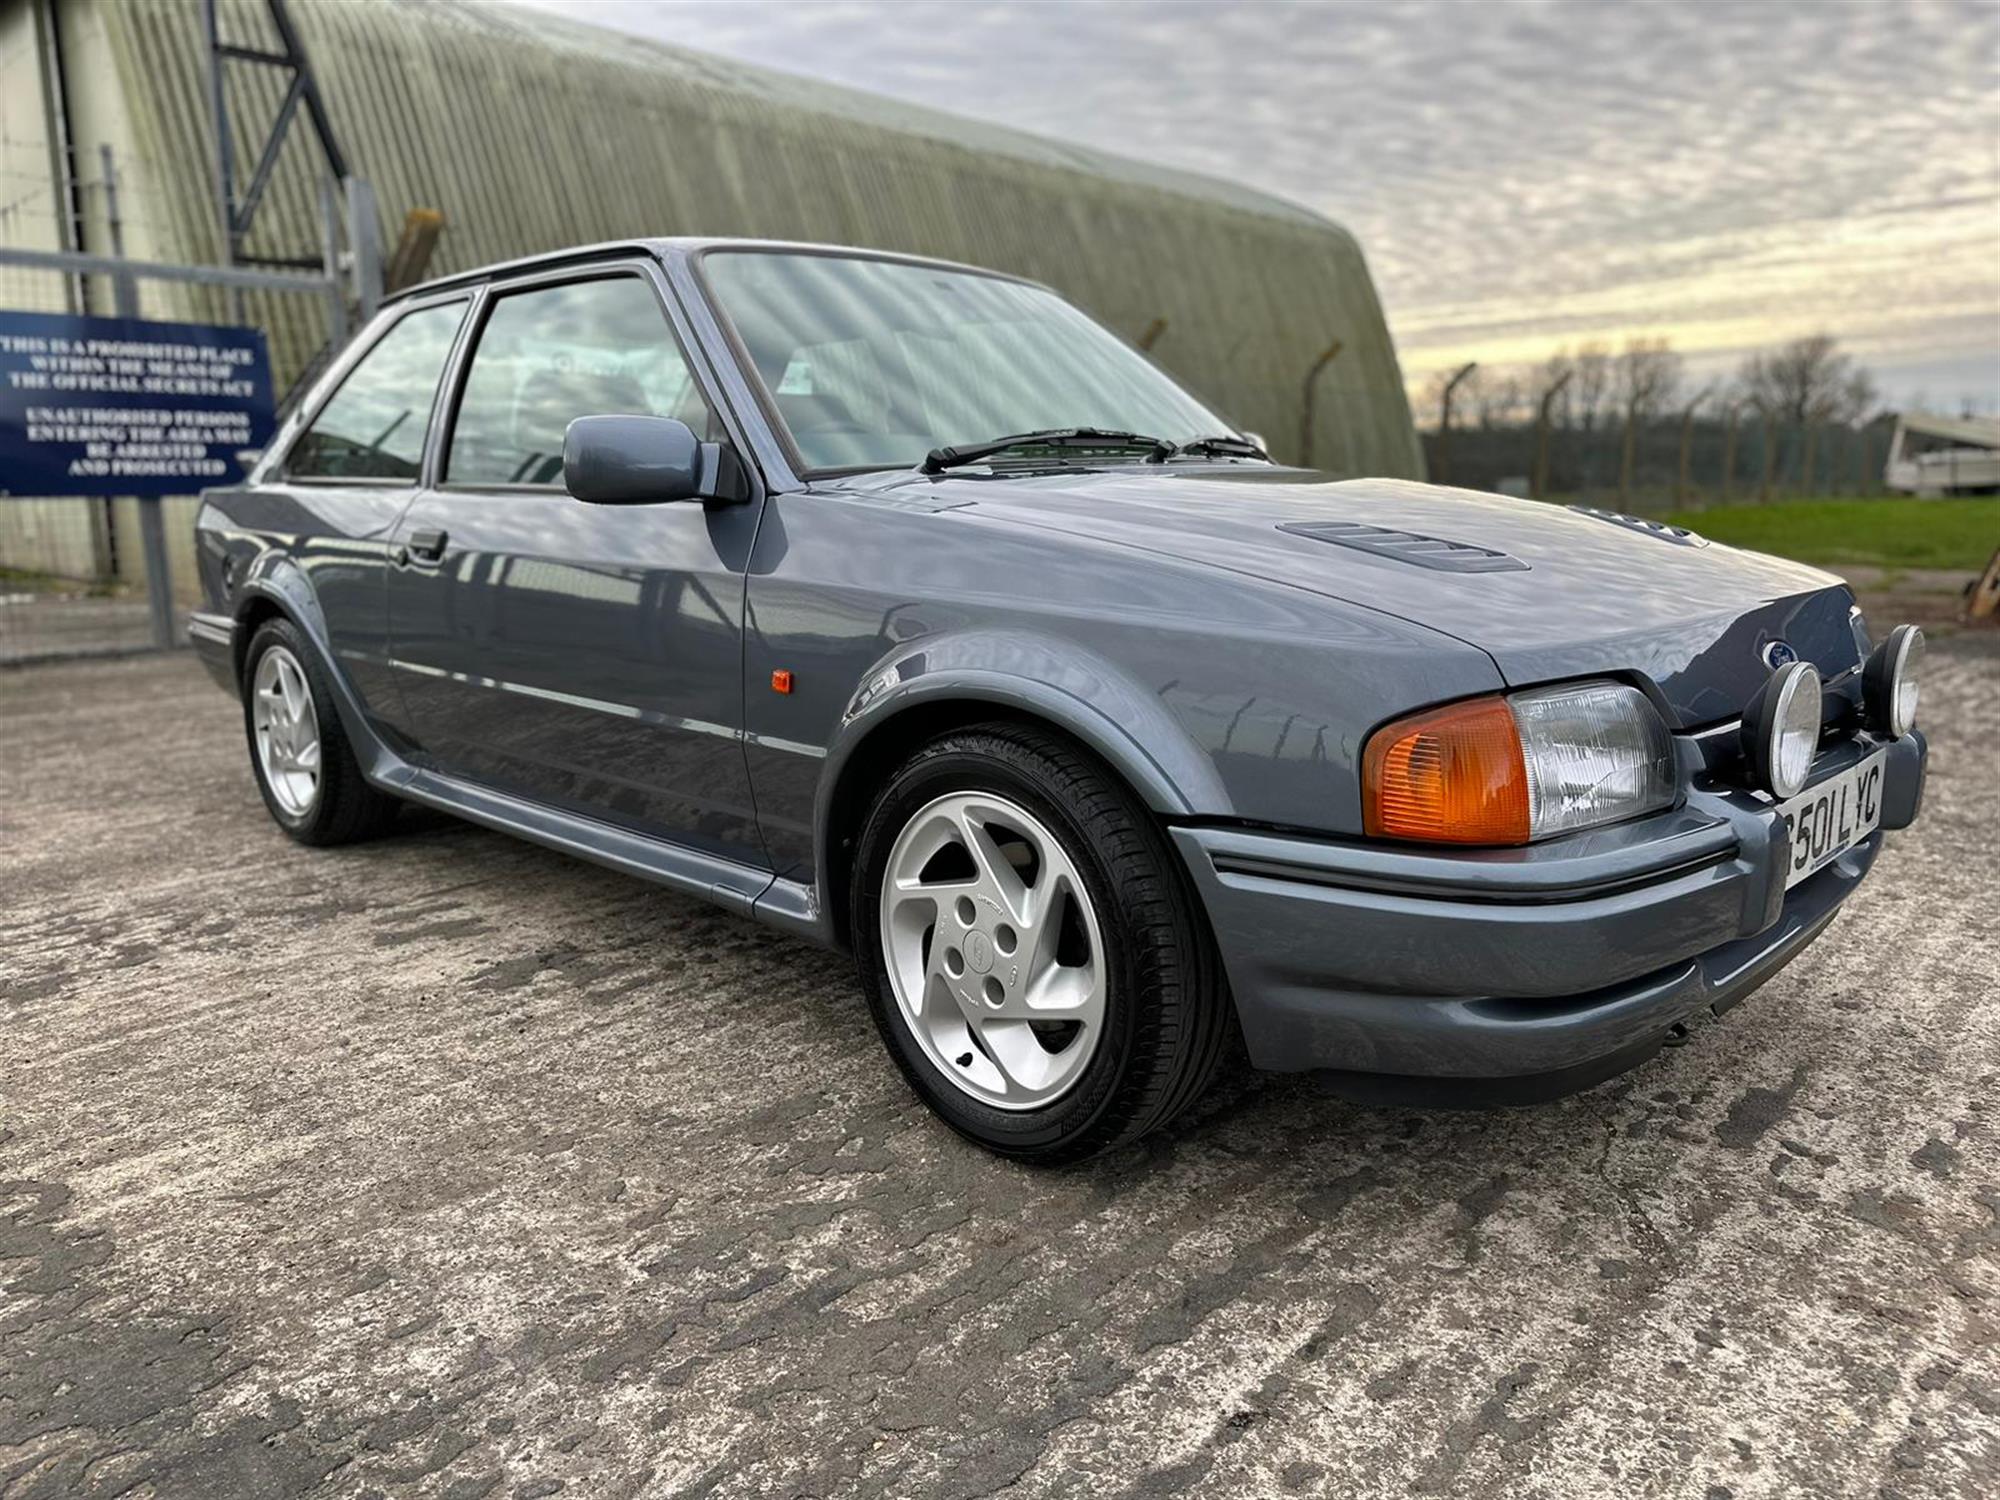 1989 Ford Escort RS Turbo S2 - Image 11 of 20